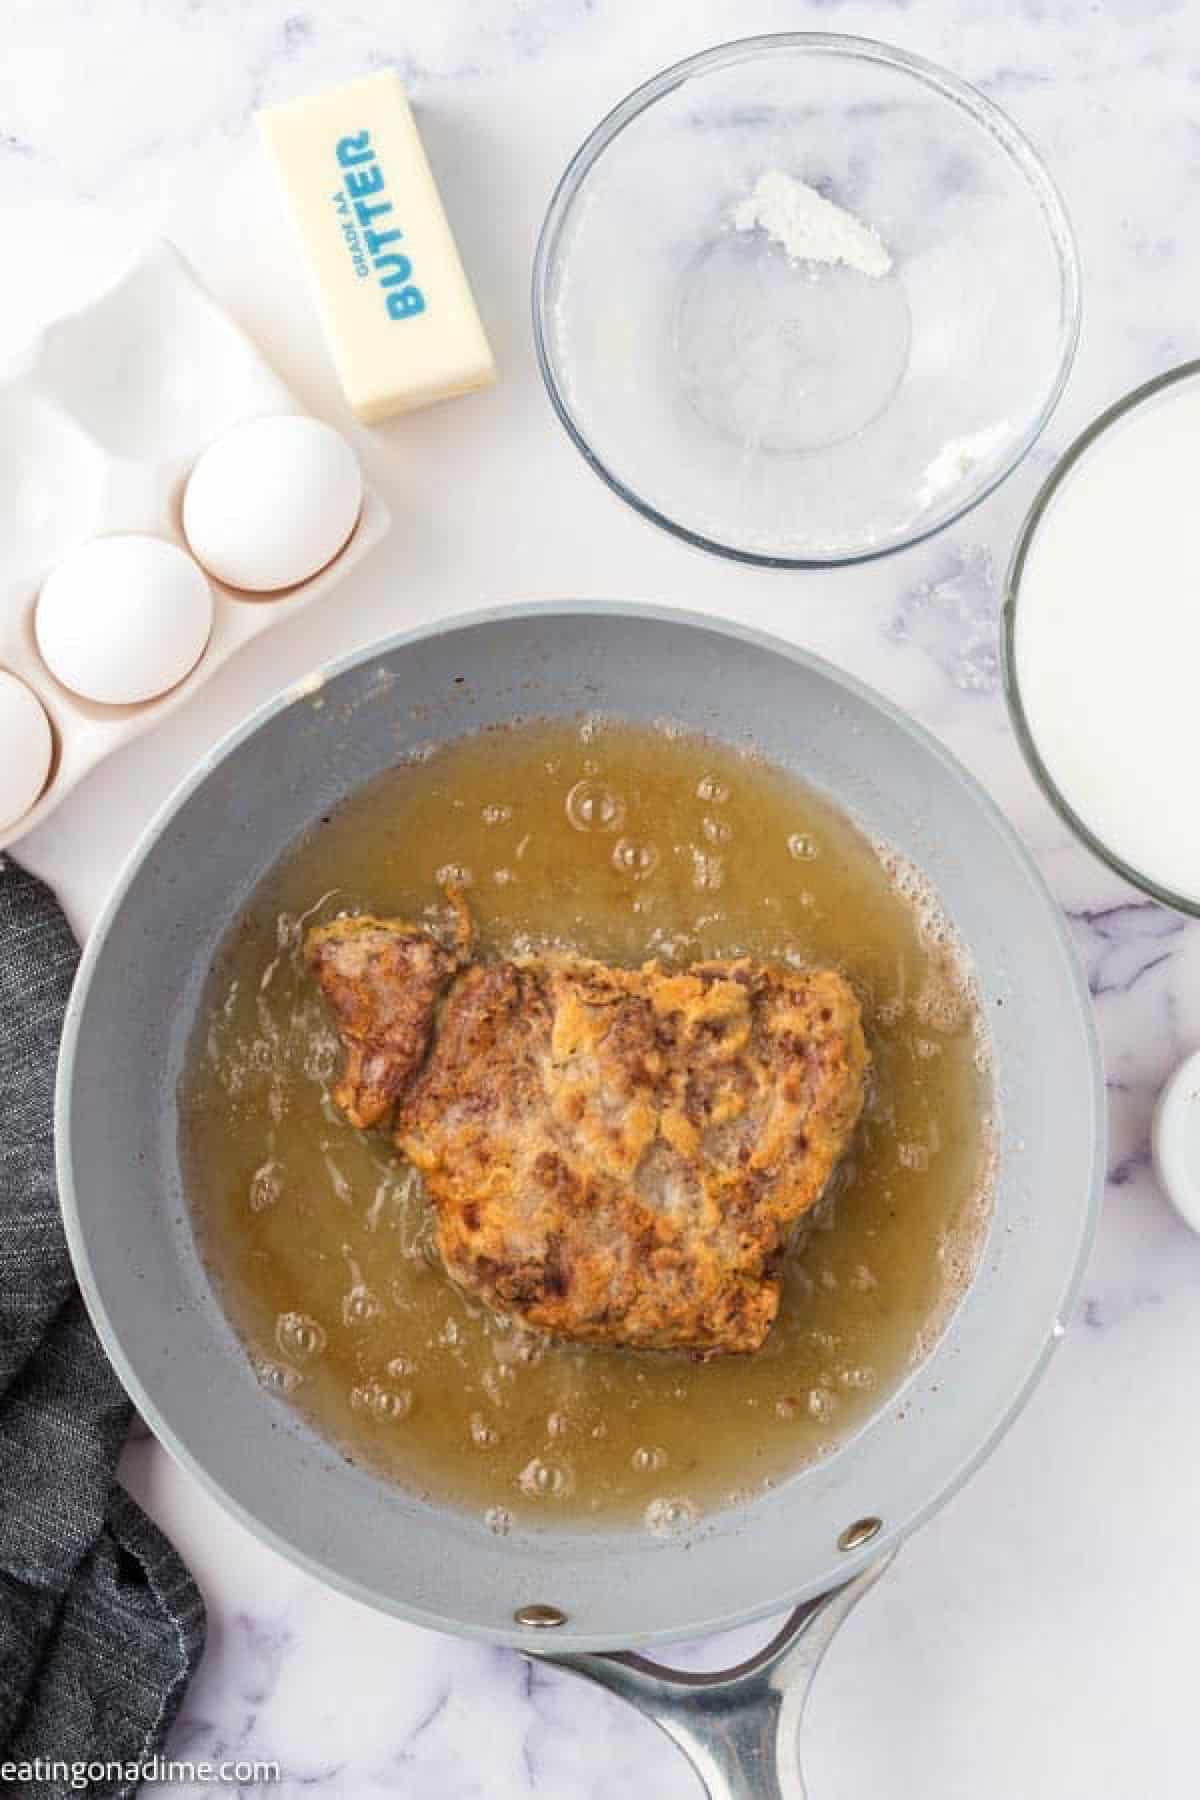 Frying chicken fried steak in a skillet with oil